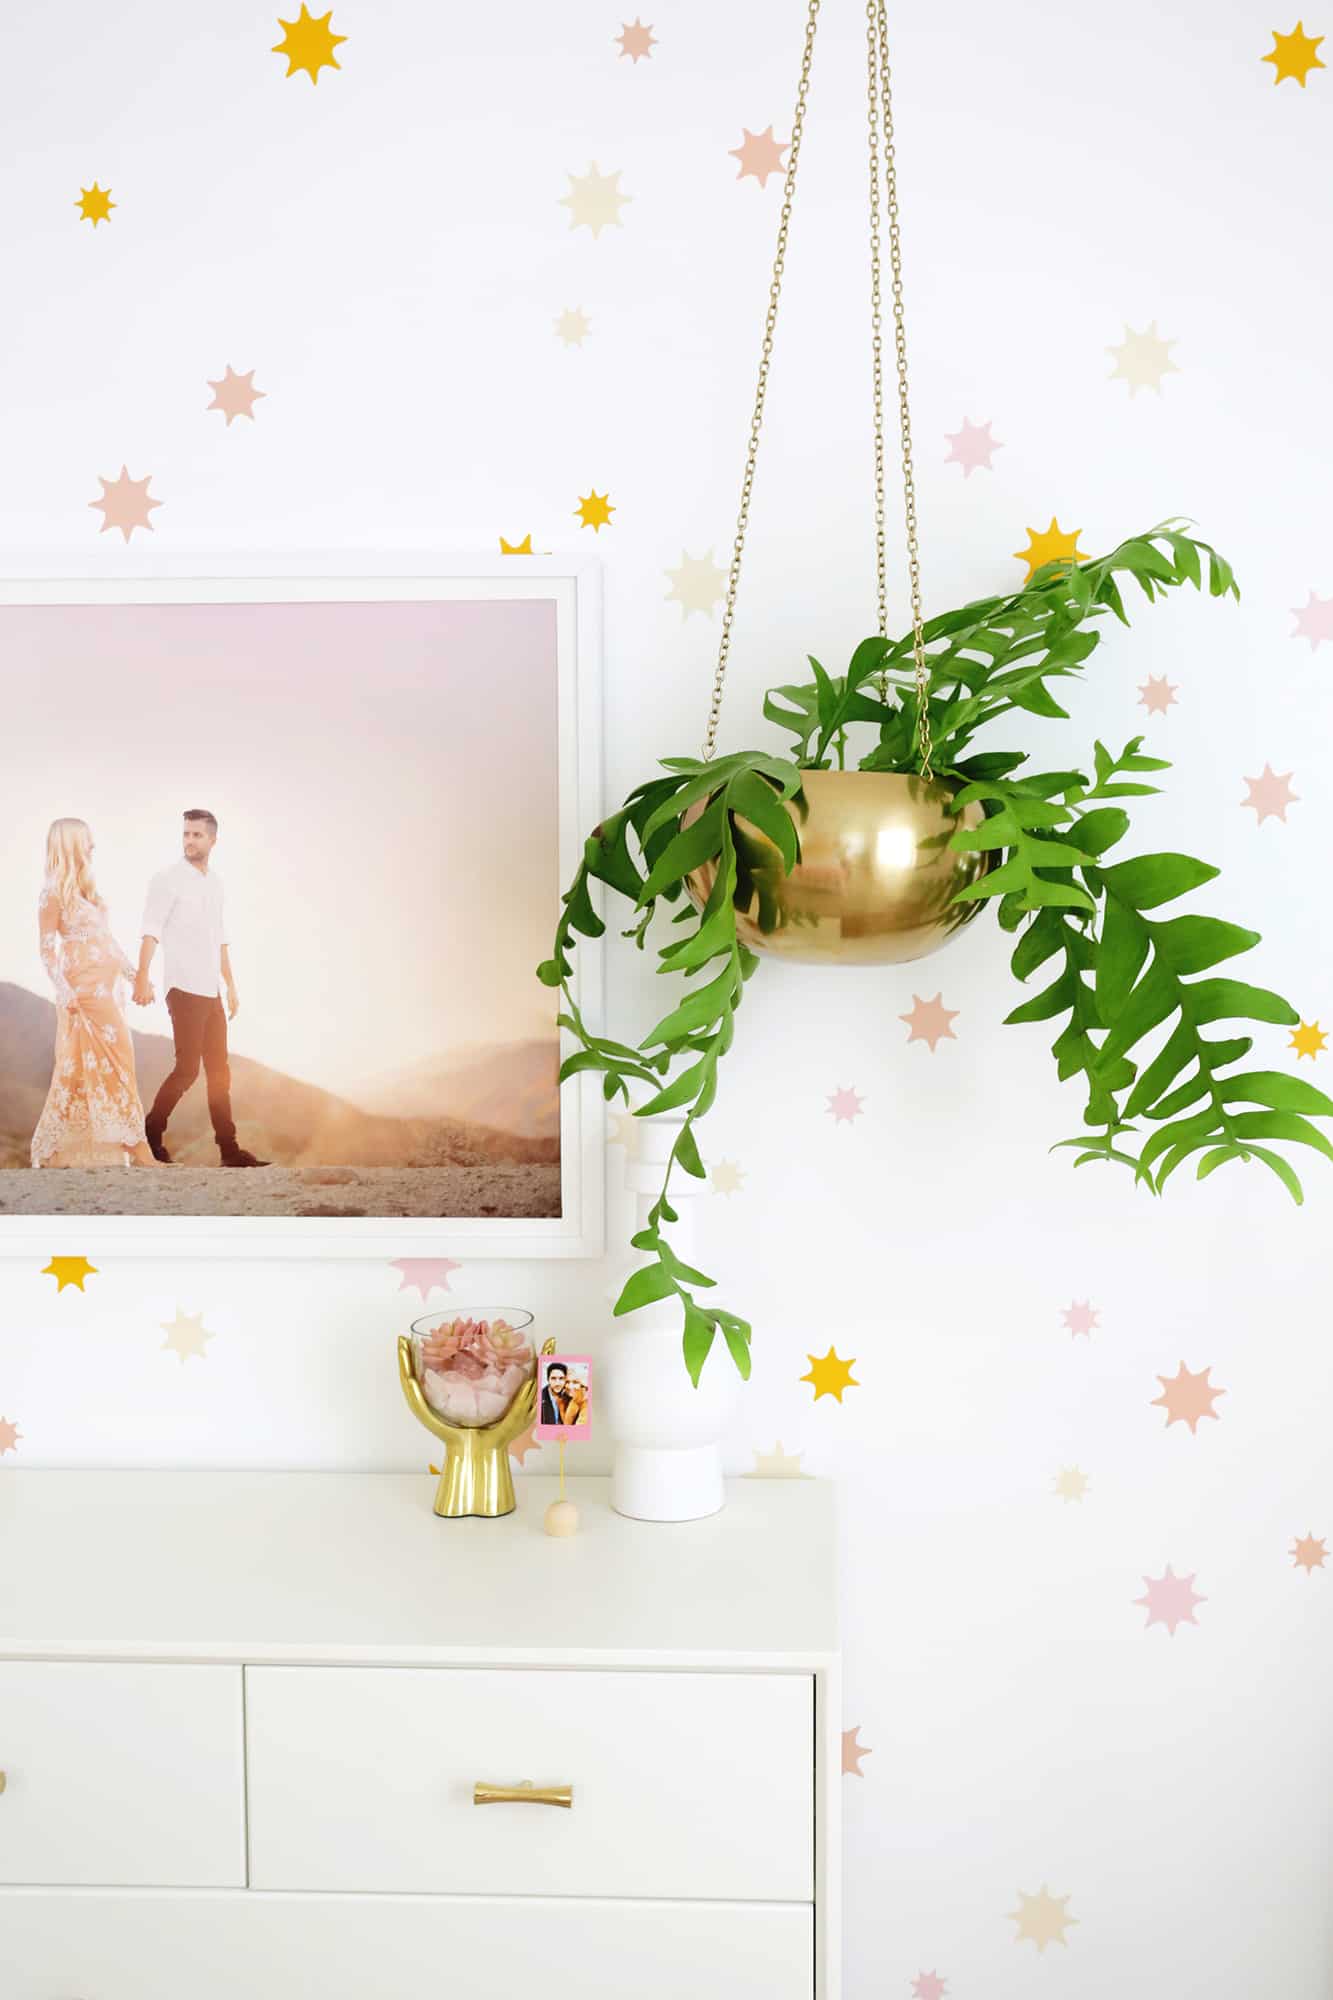 star wallpaper with a dresser and hanging plant